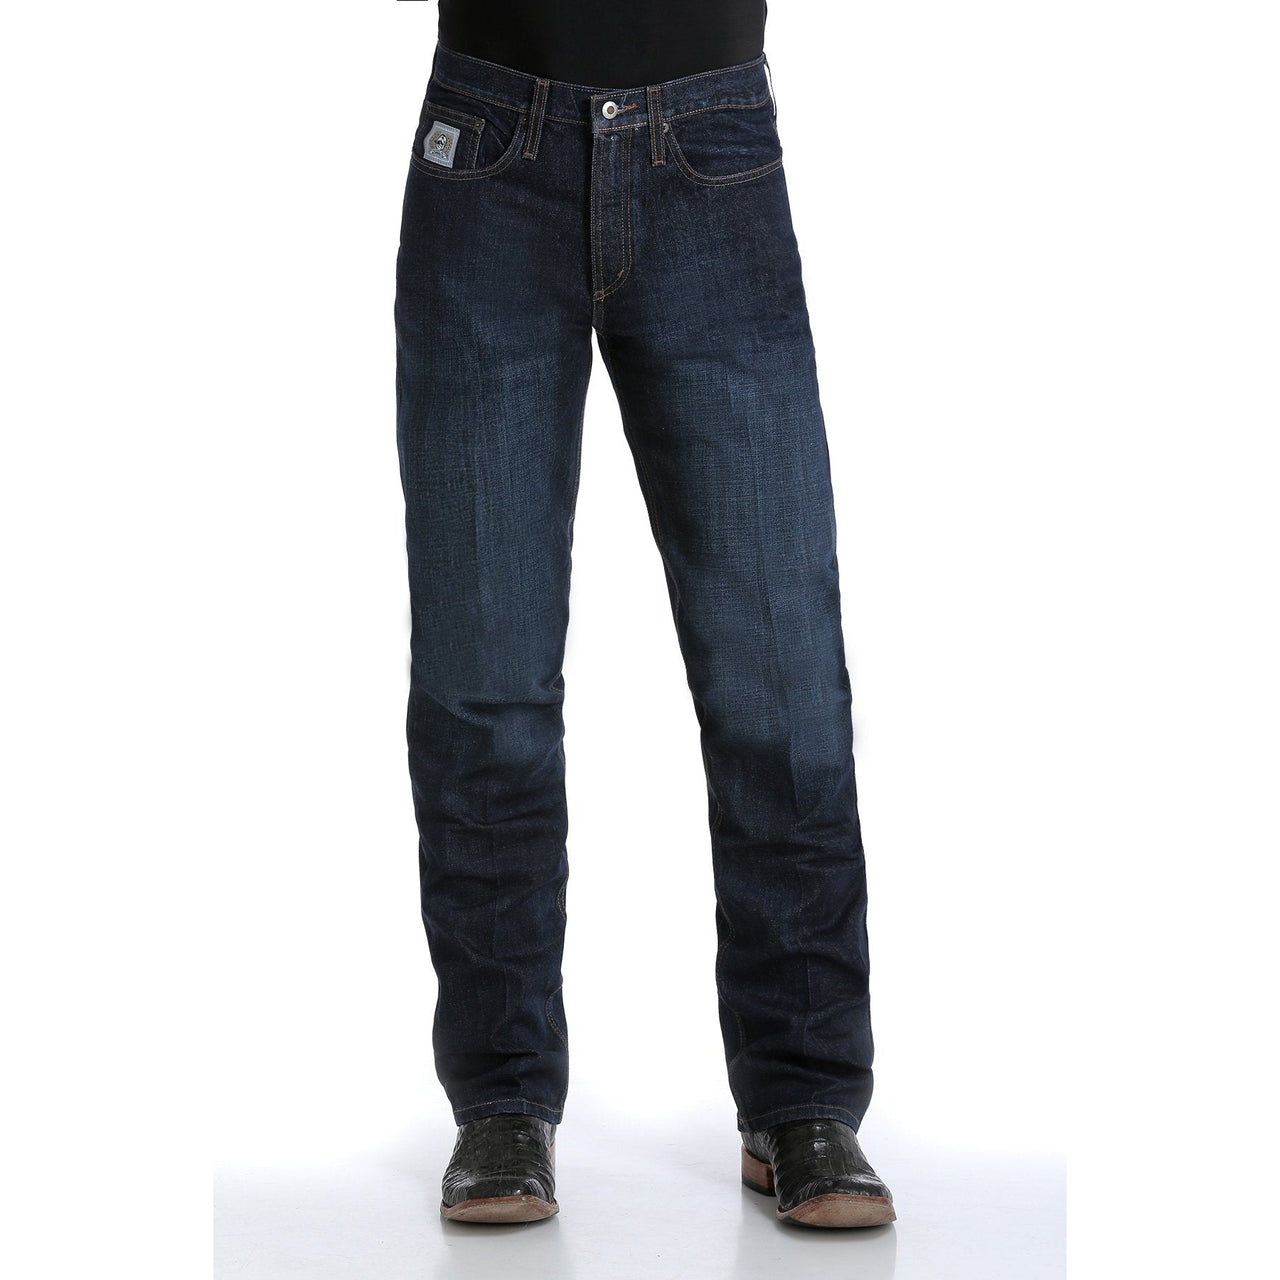 Huateng Mens Hippie Indie Bootcut Jeans Flared Denim Pants All Waist Sizes